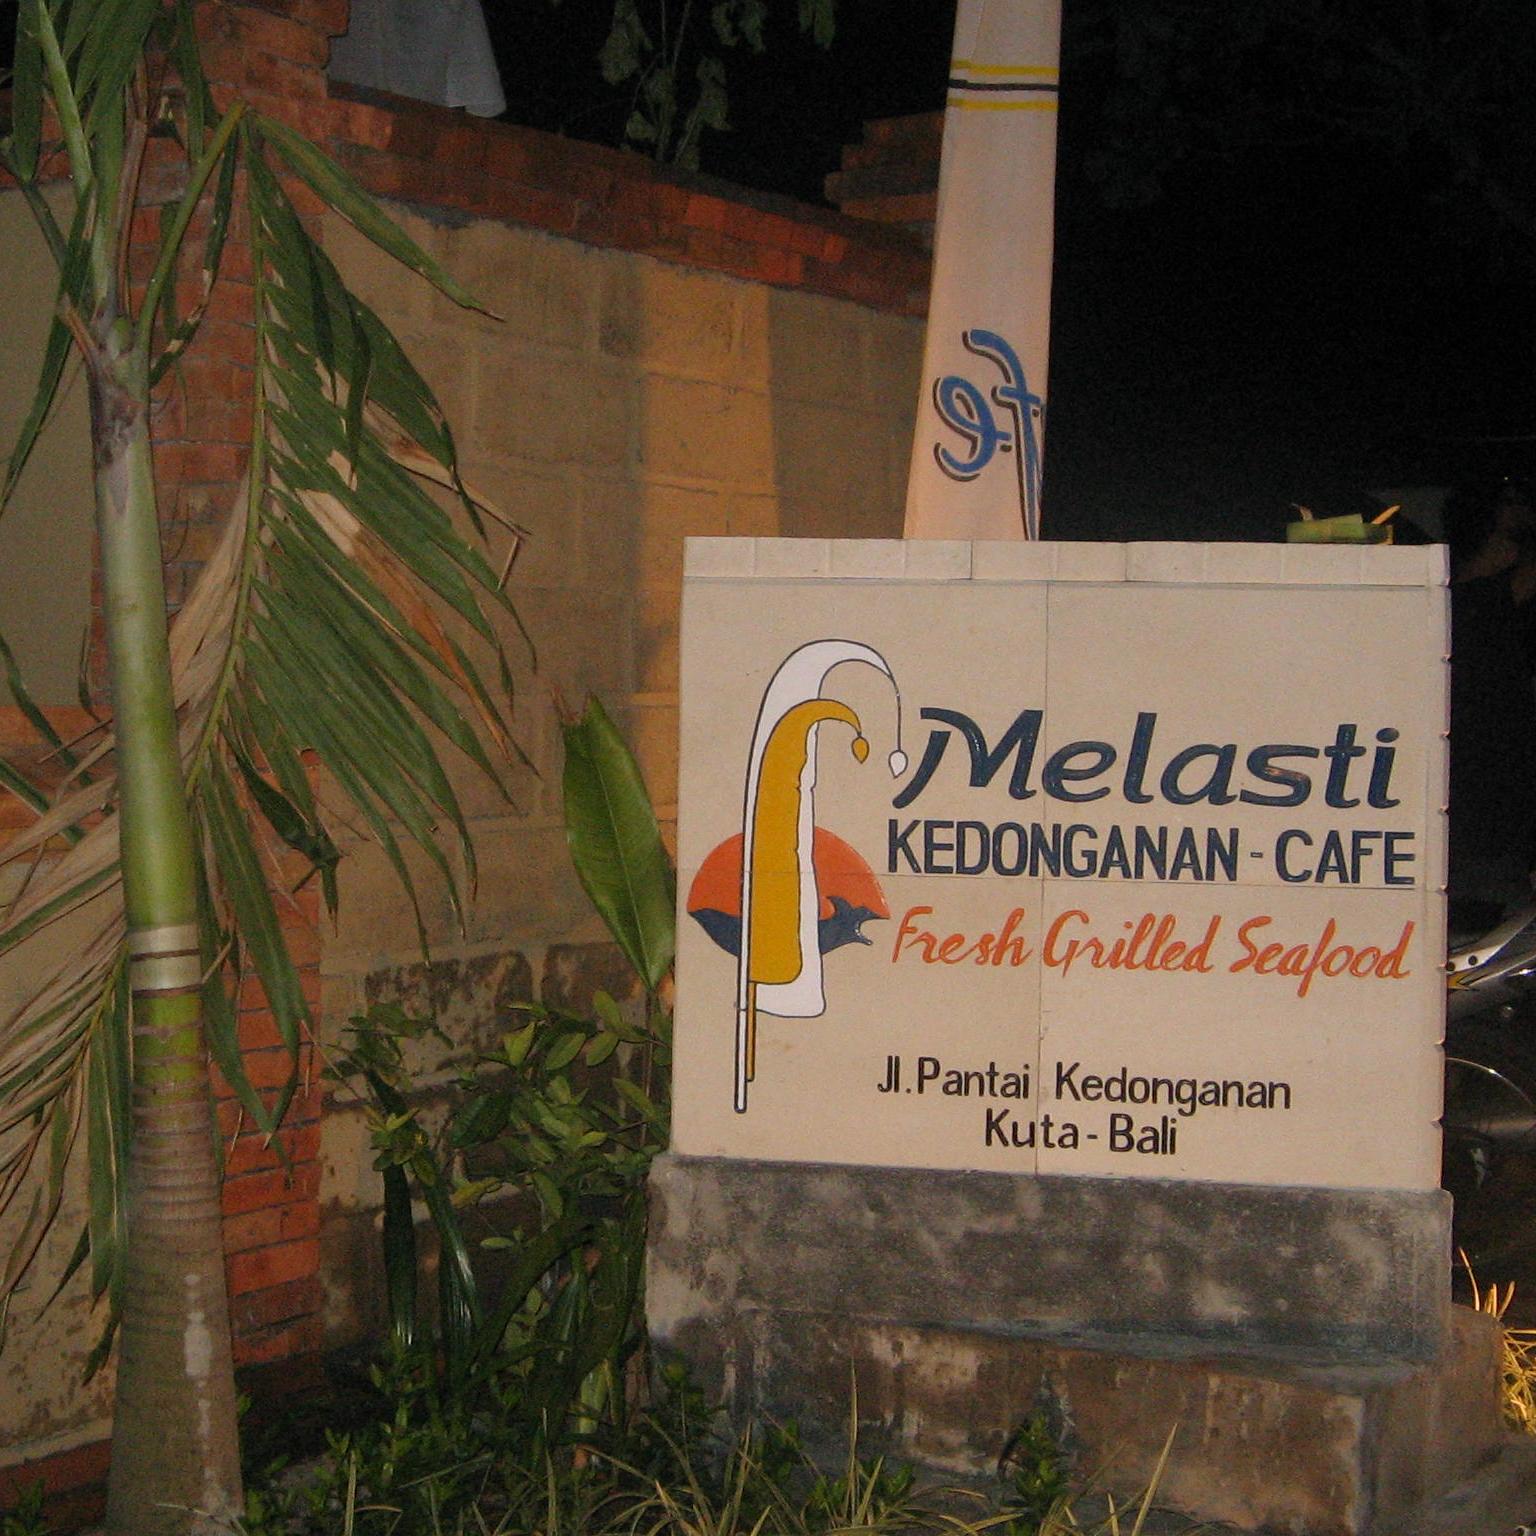 Sunset at MELASTI cafe KEDONGANAN get different felling for you dinning.